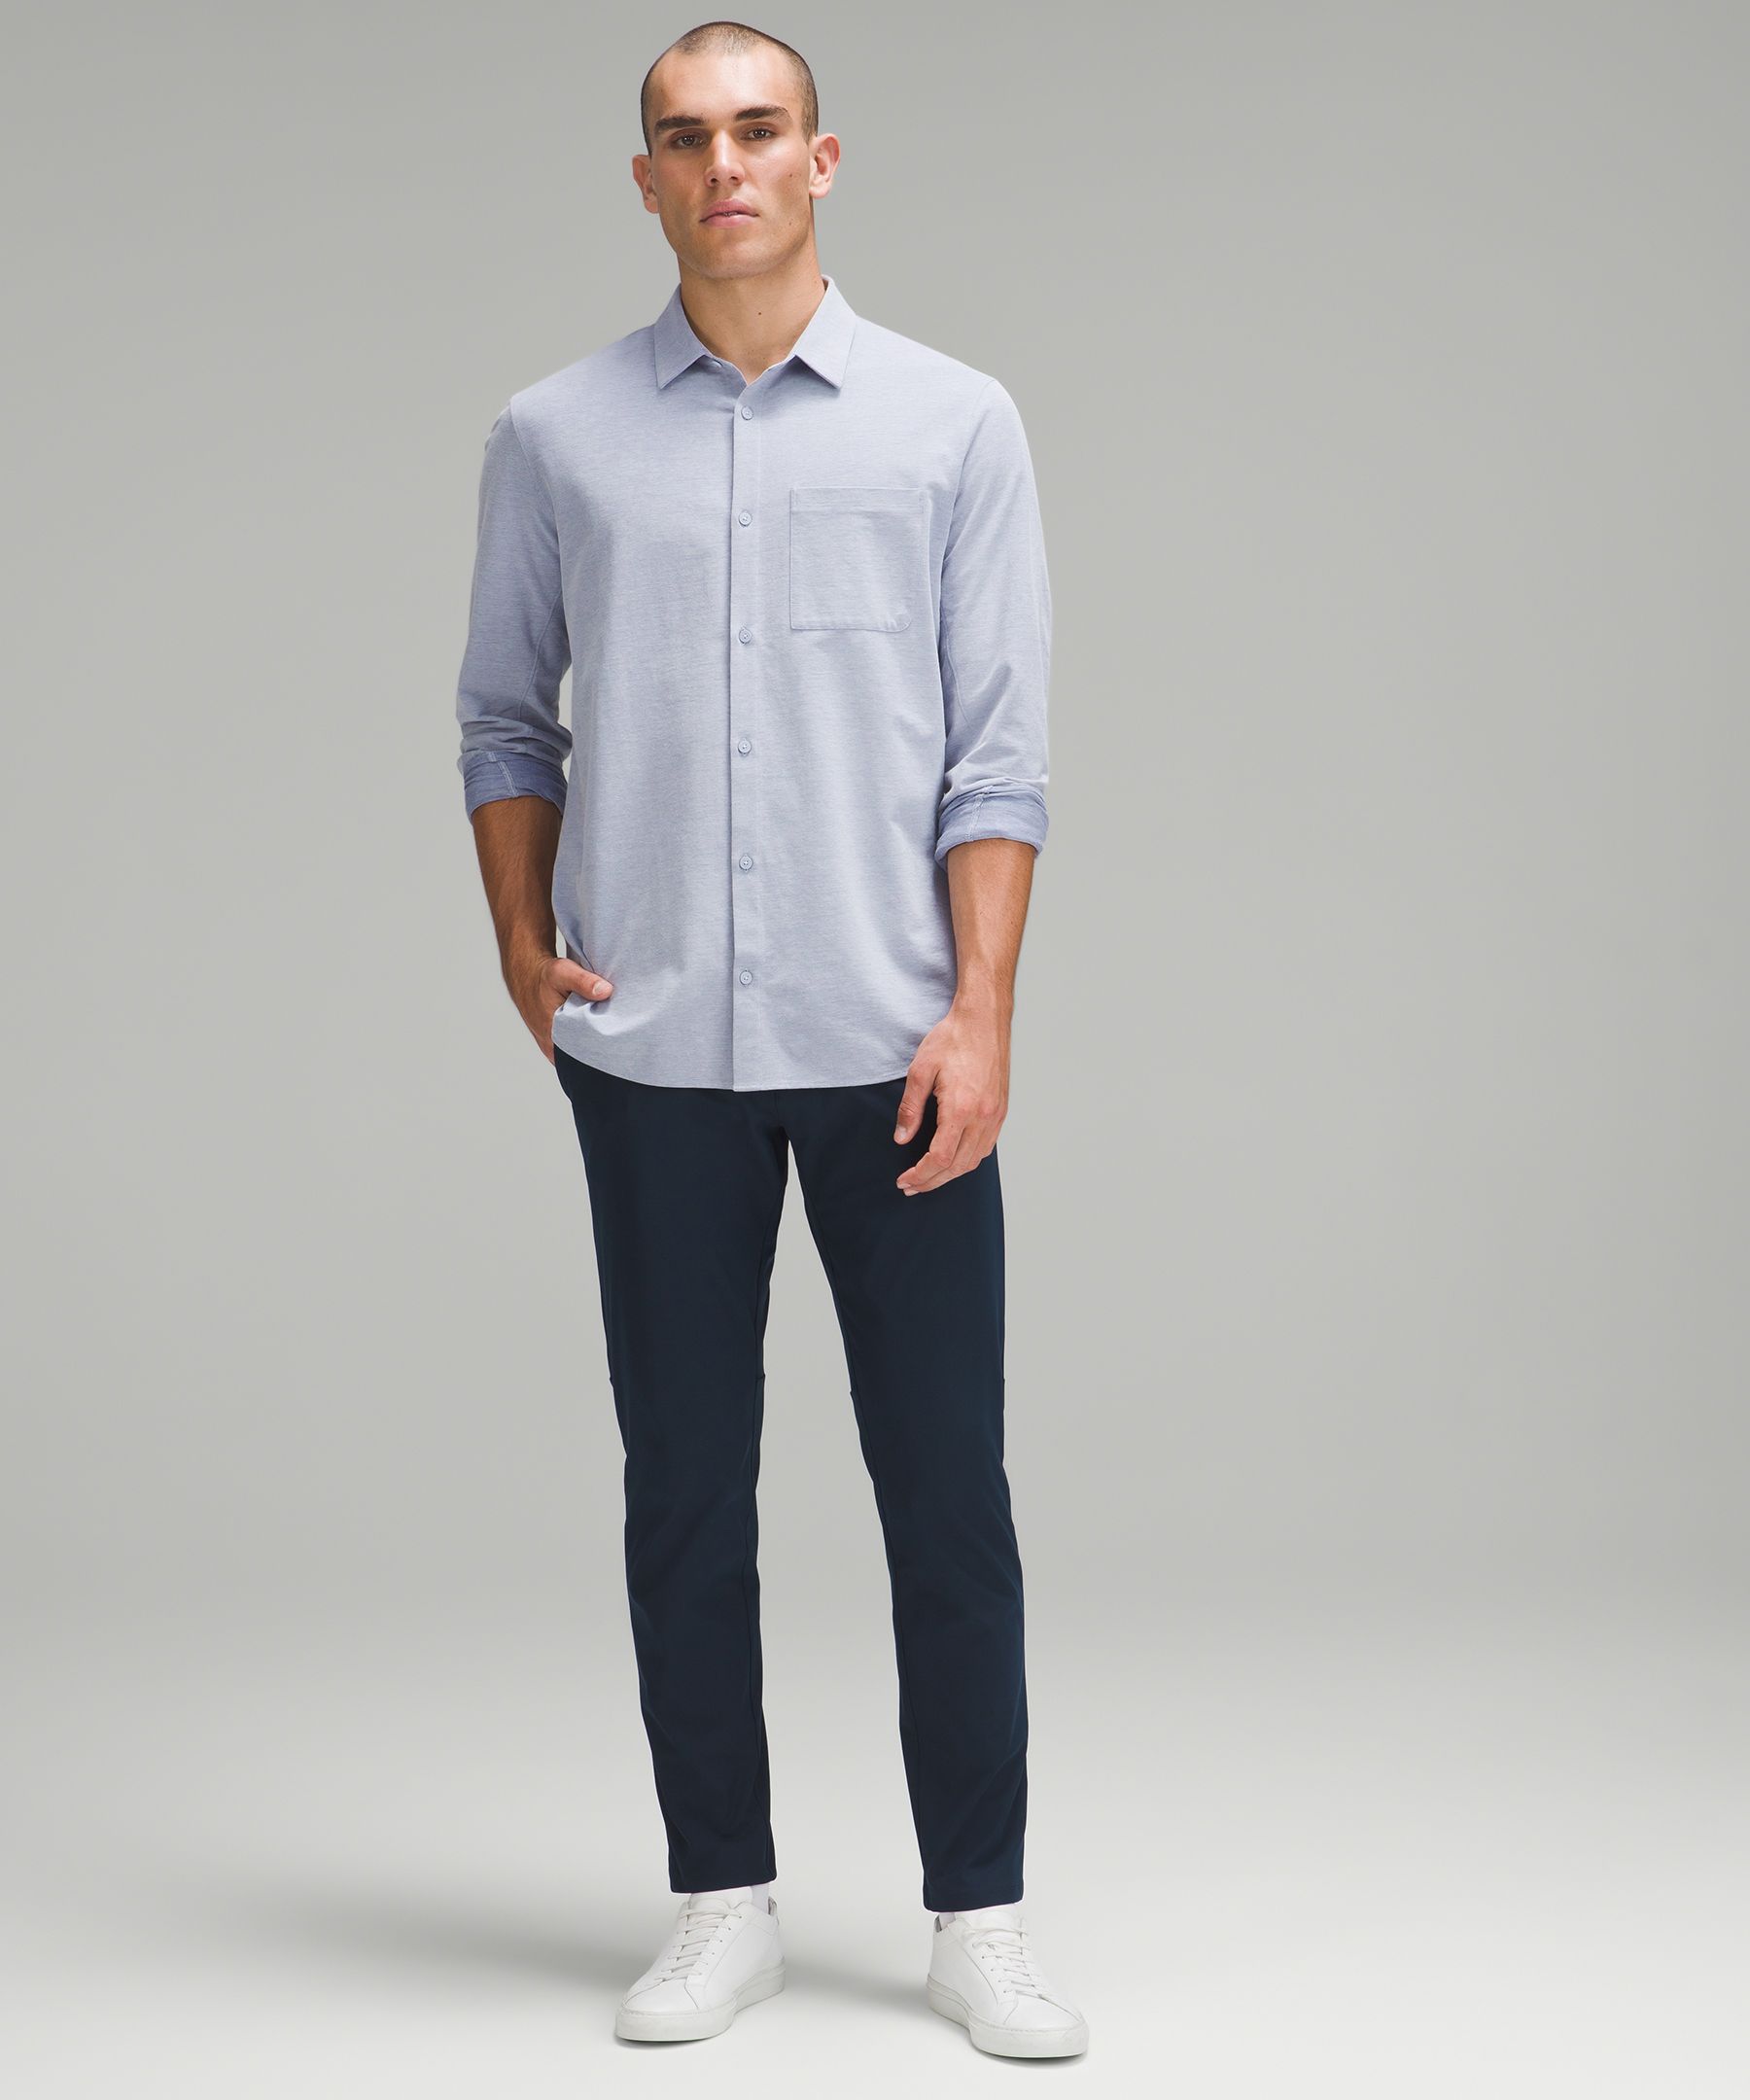 Father's Day Casual Wear Gifts | lululemon